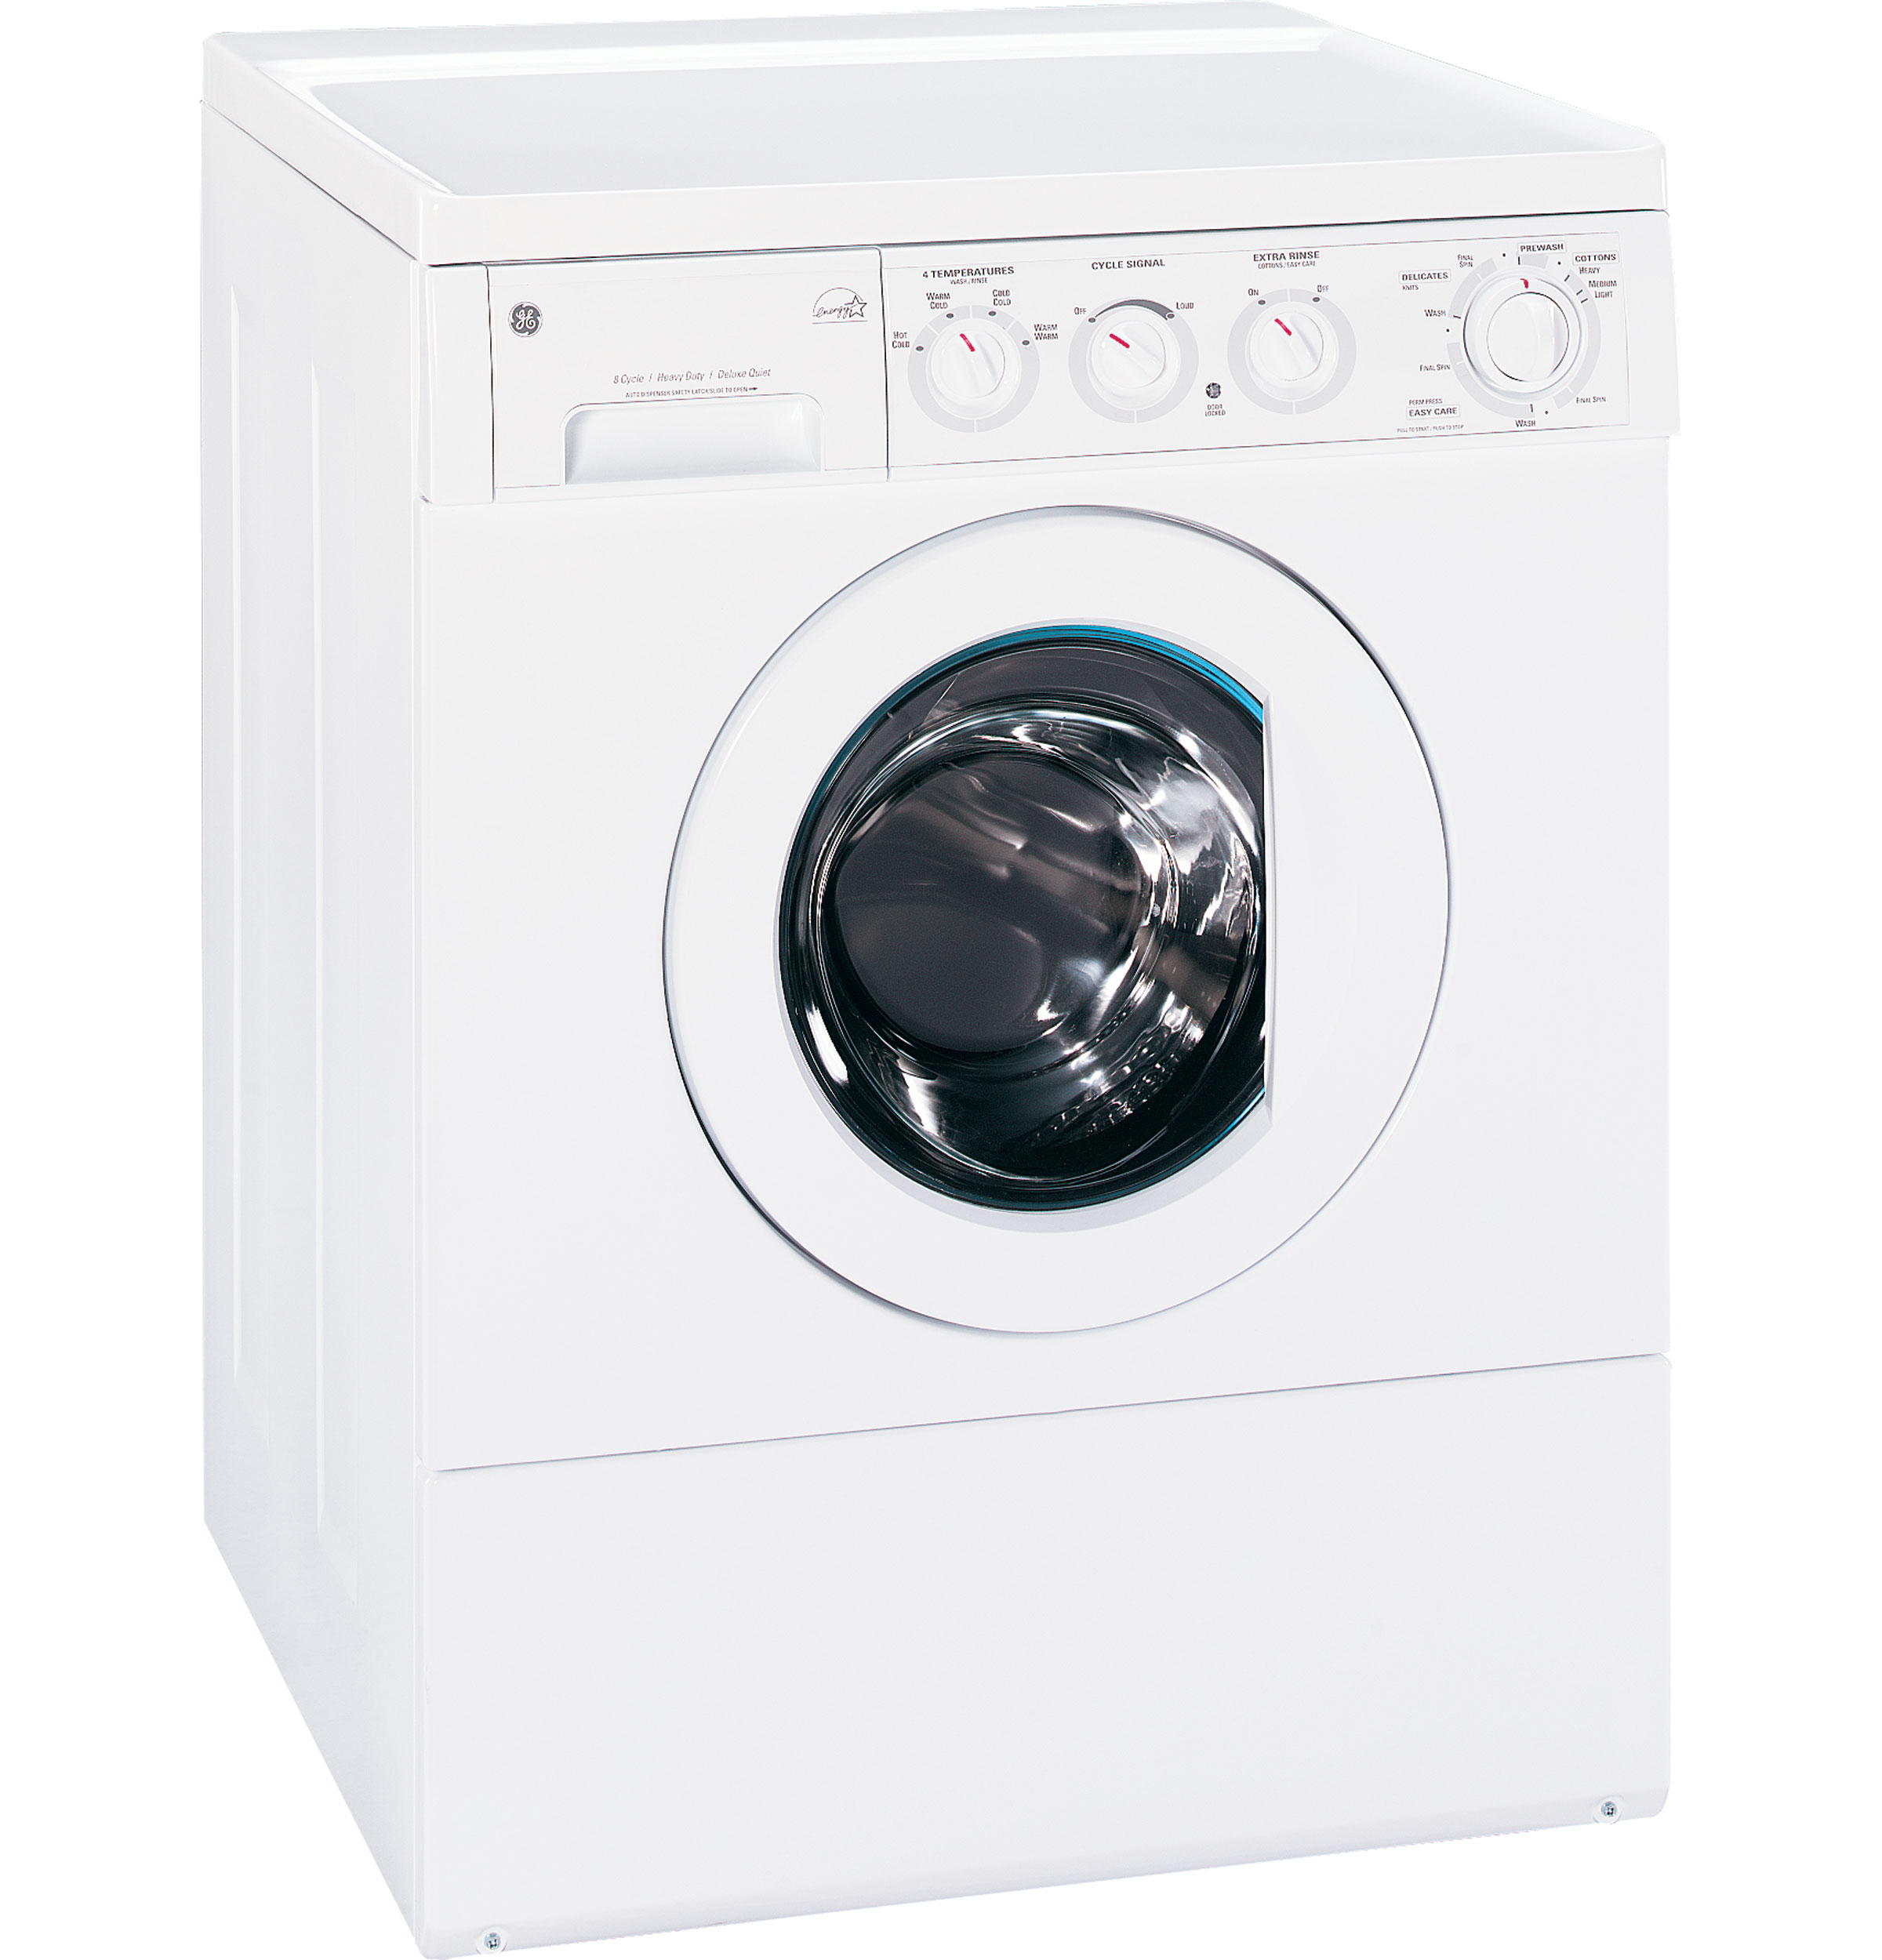 GE® Extra-Large Frontload Washer with Stainless Steel Basket